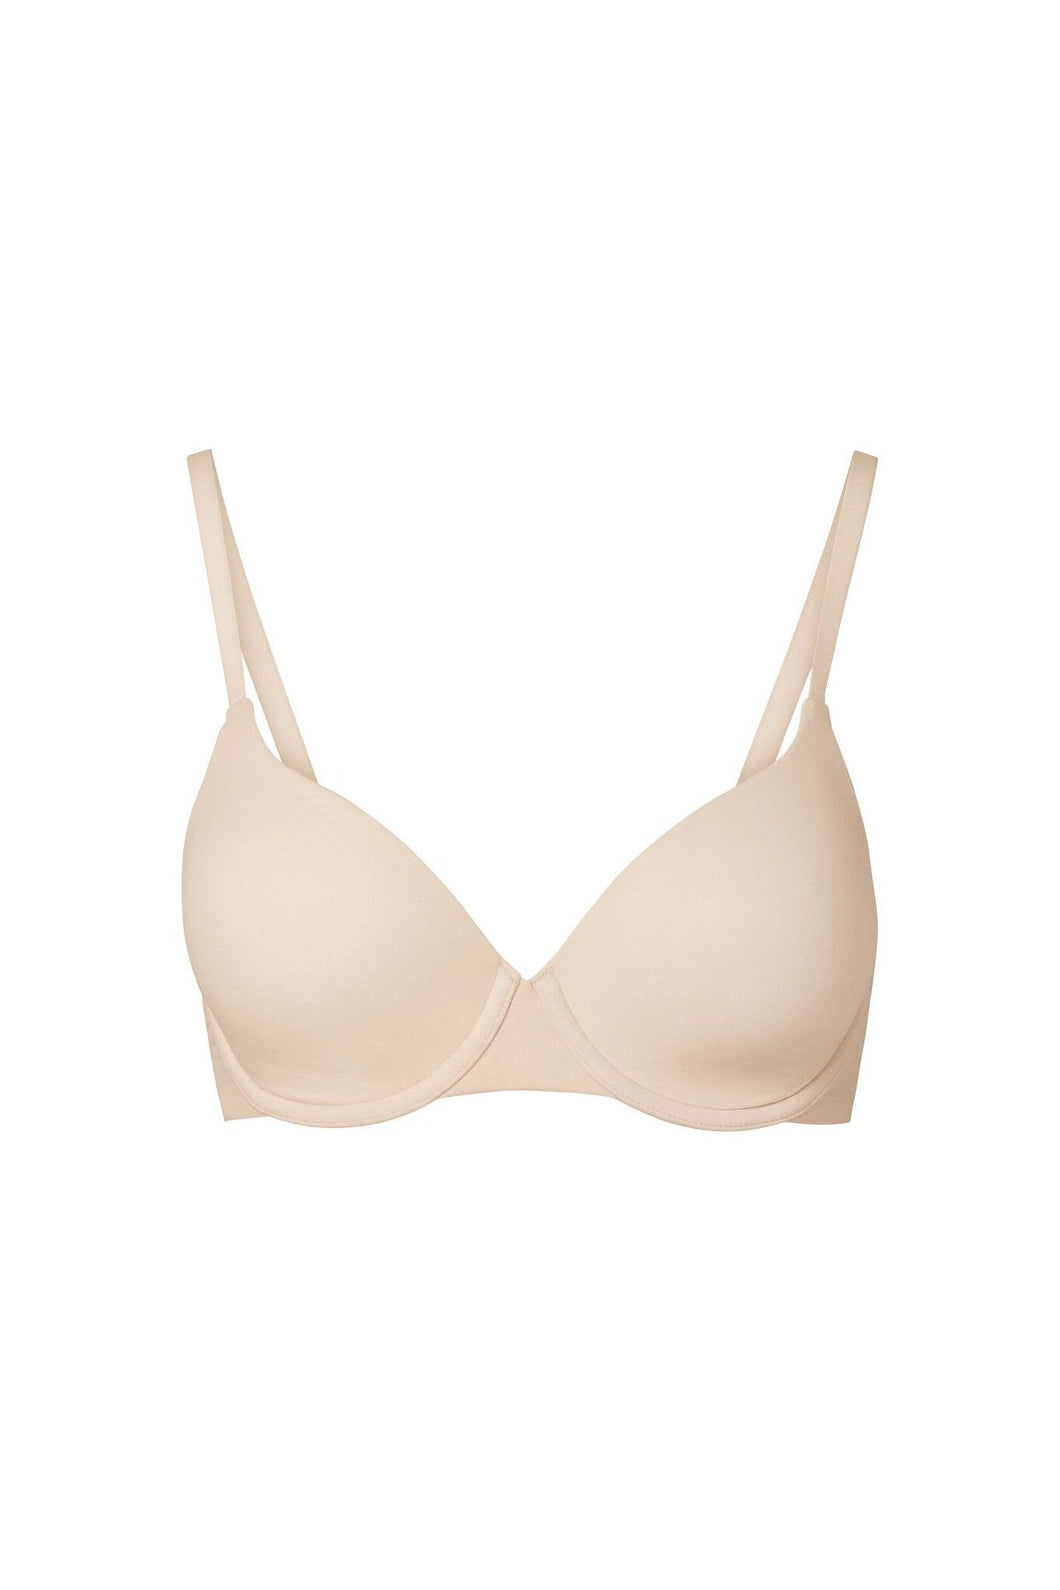 nueskin Janelle Underwired T-Shirt Bra in color Appleblossom and shape demi